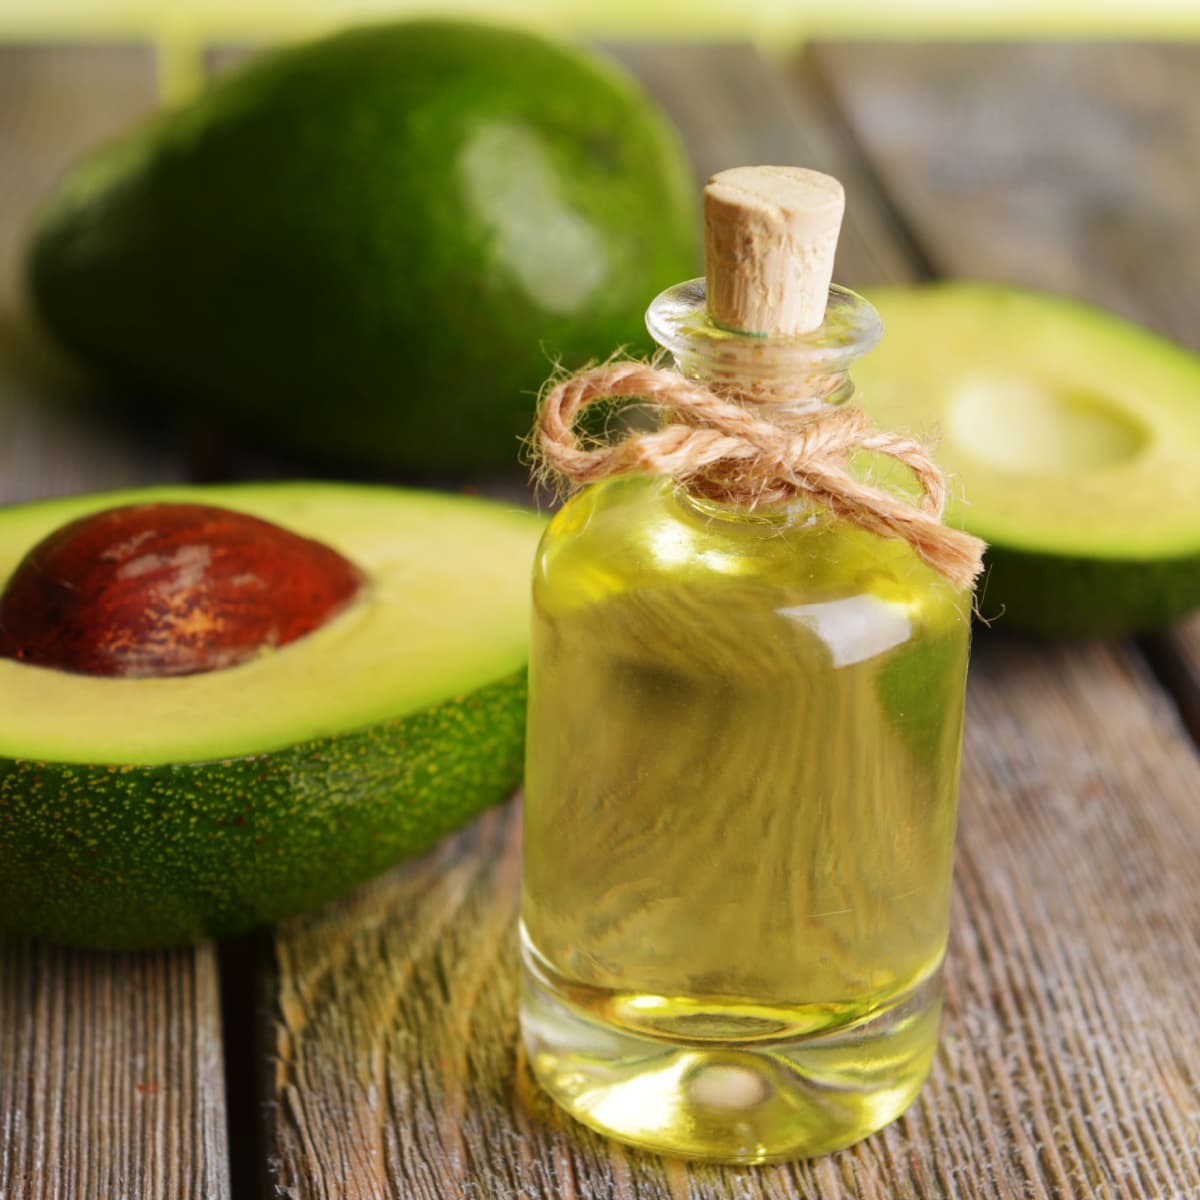 A Bottle of Avocado Oil and Fresh Avocados on a Wooden Table